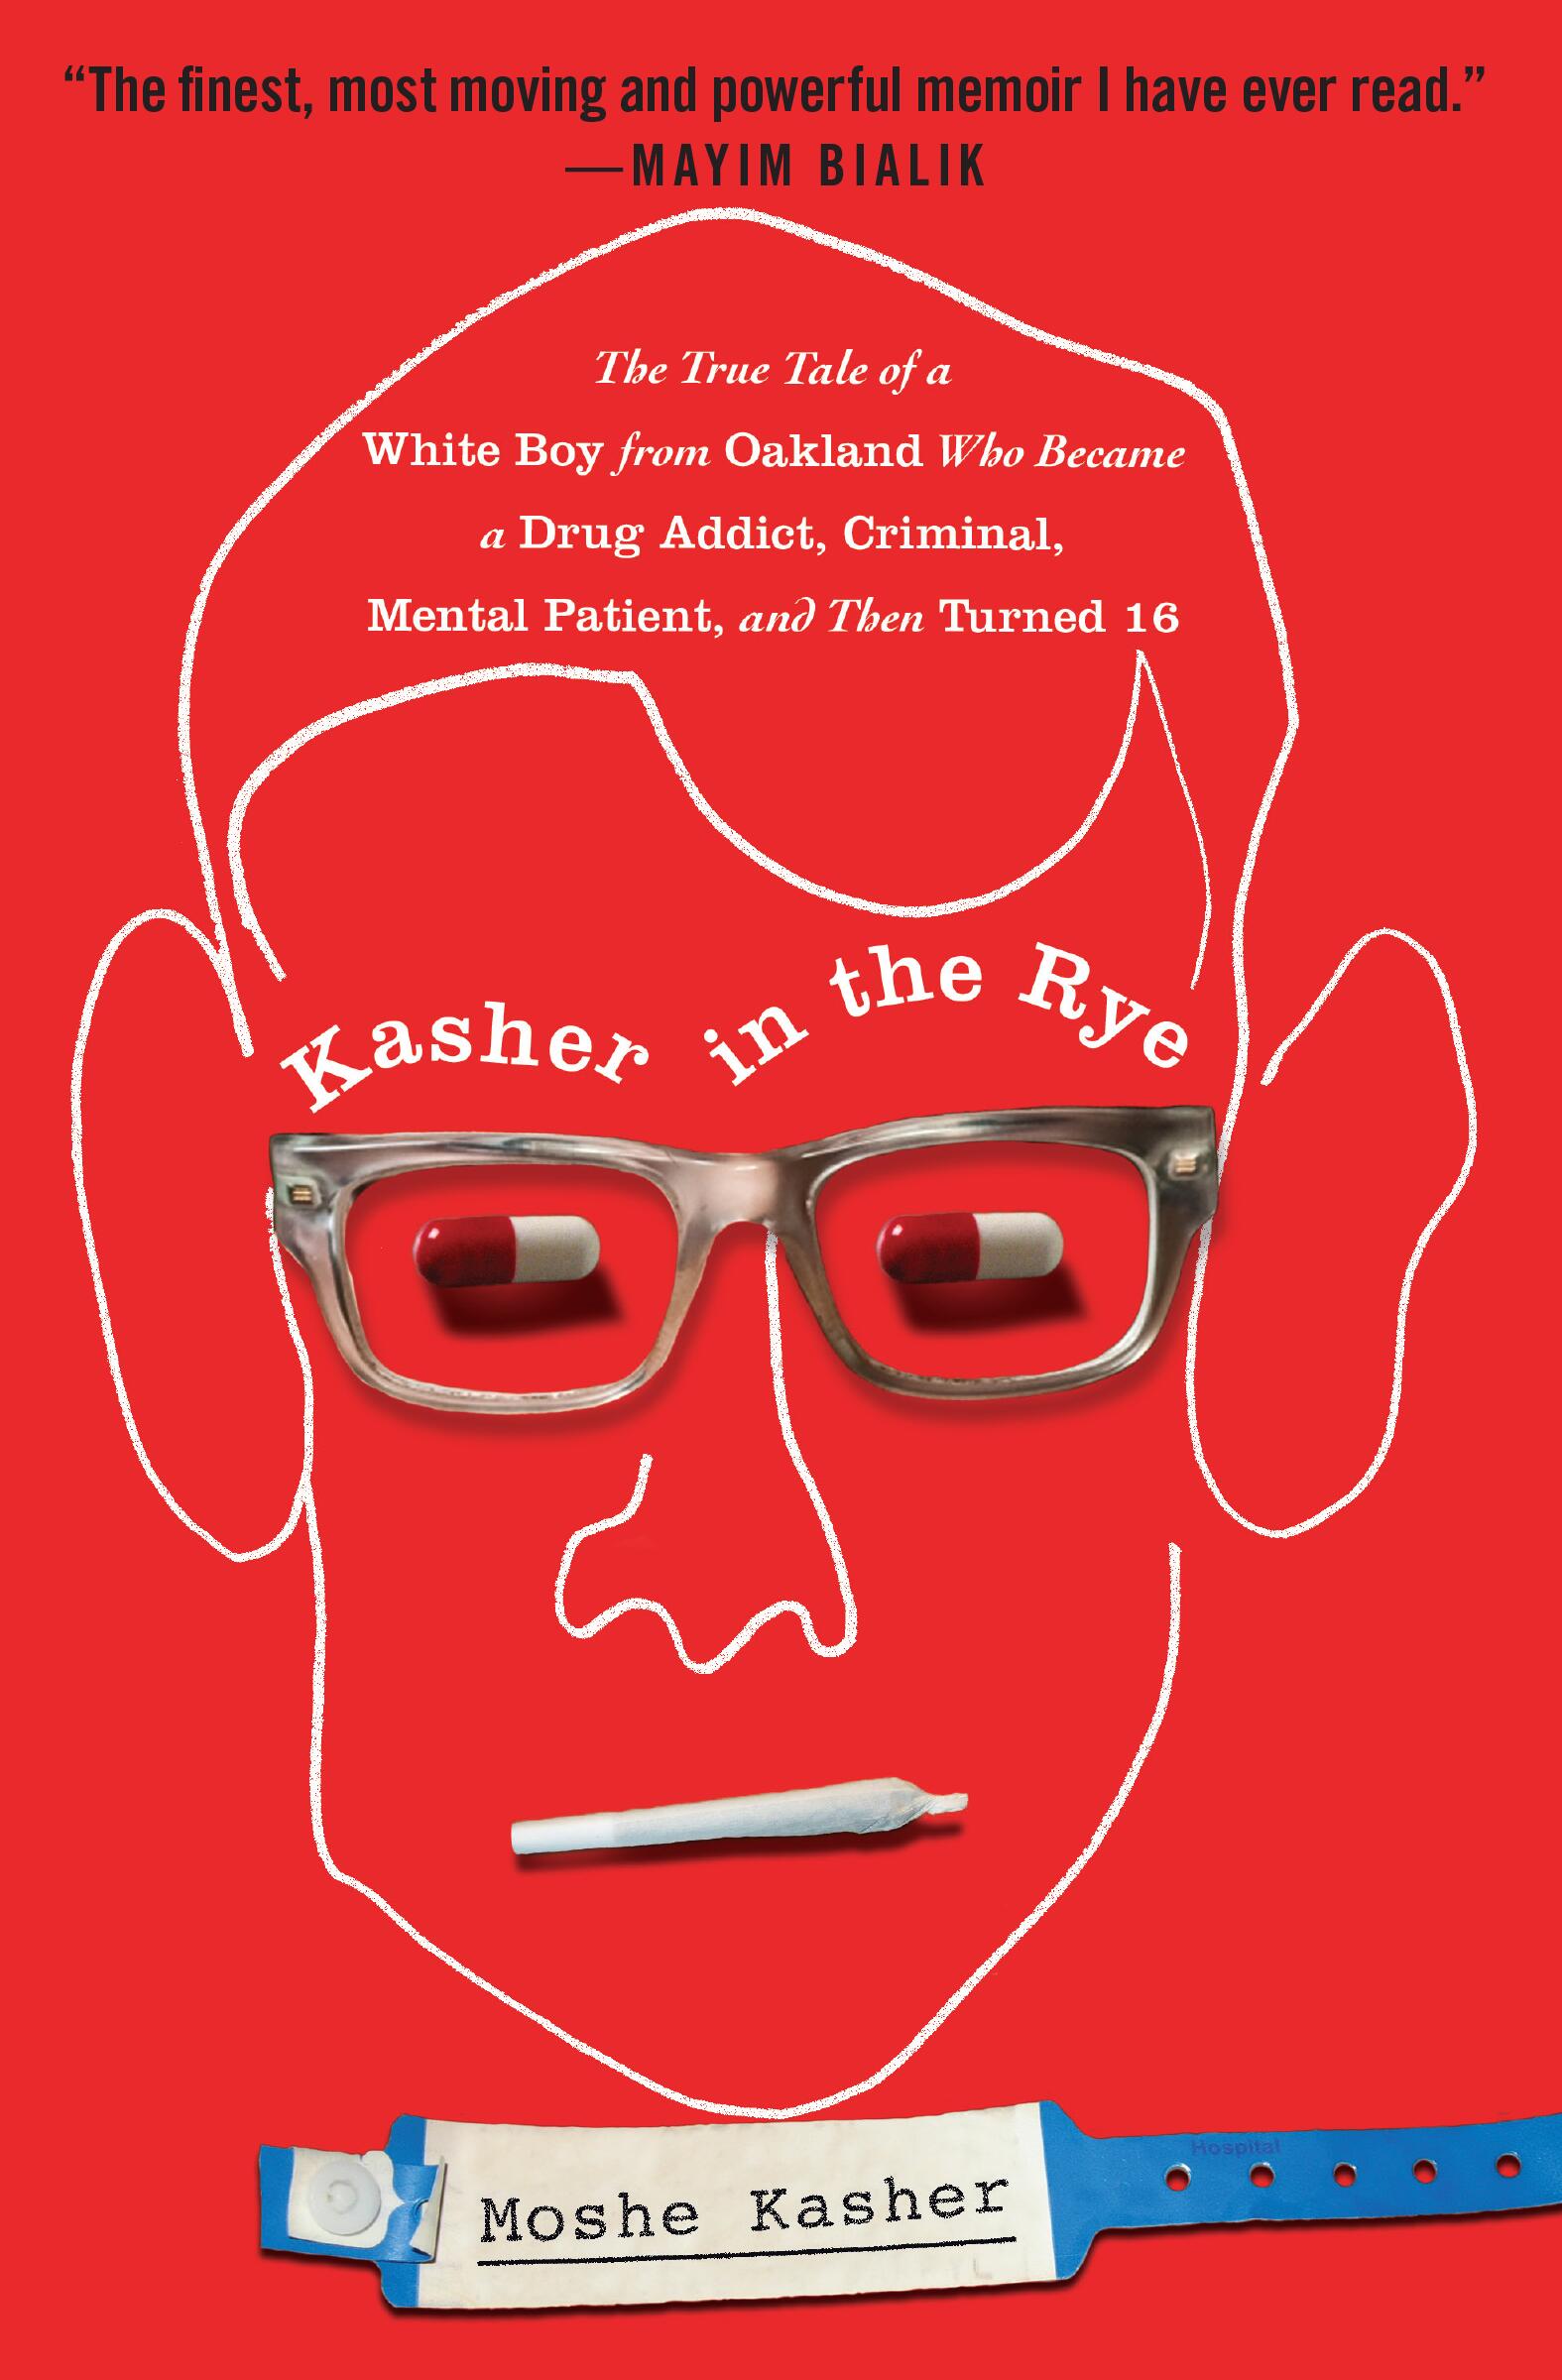 Kasher in the Rye by Moshe Kasher Hachette Book Group